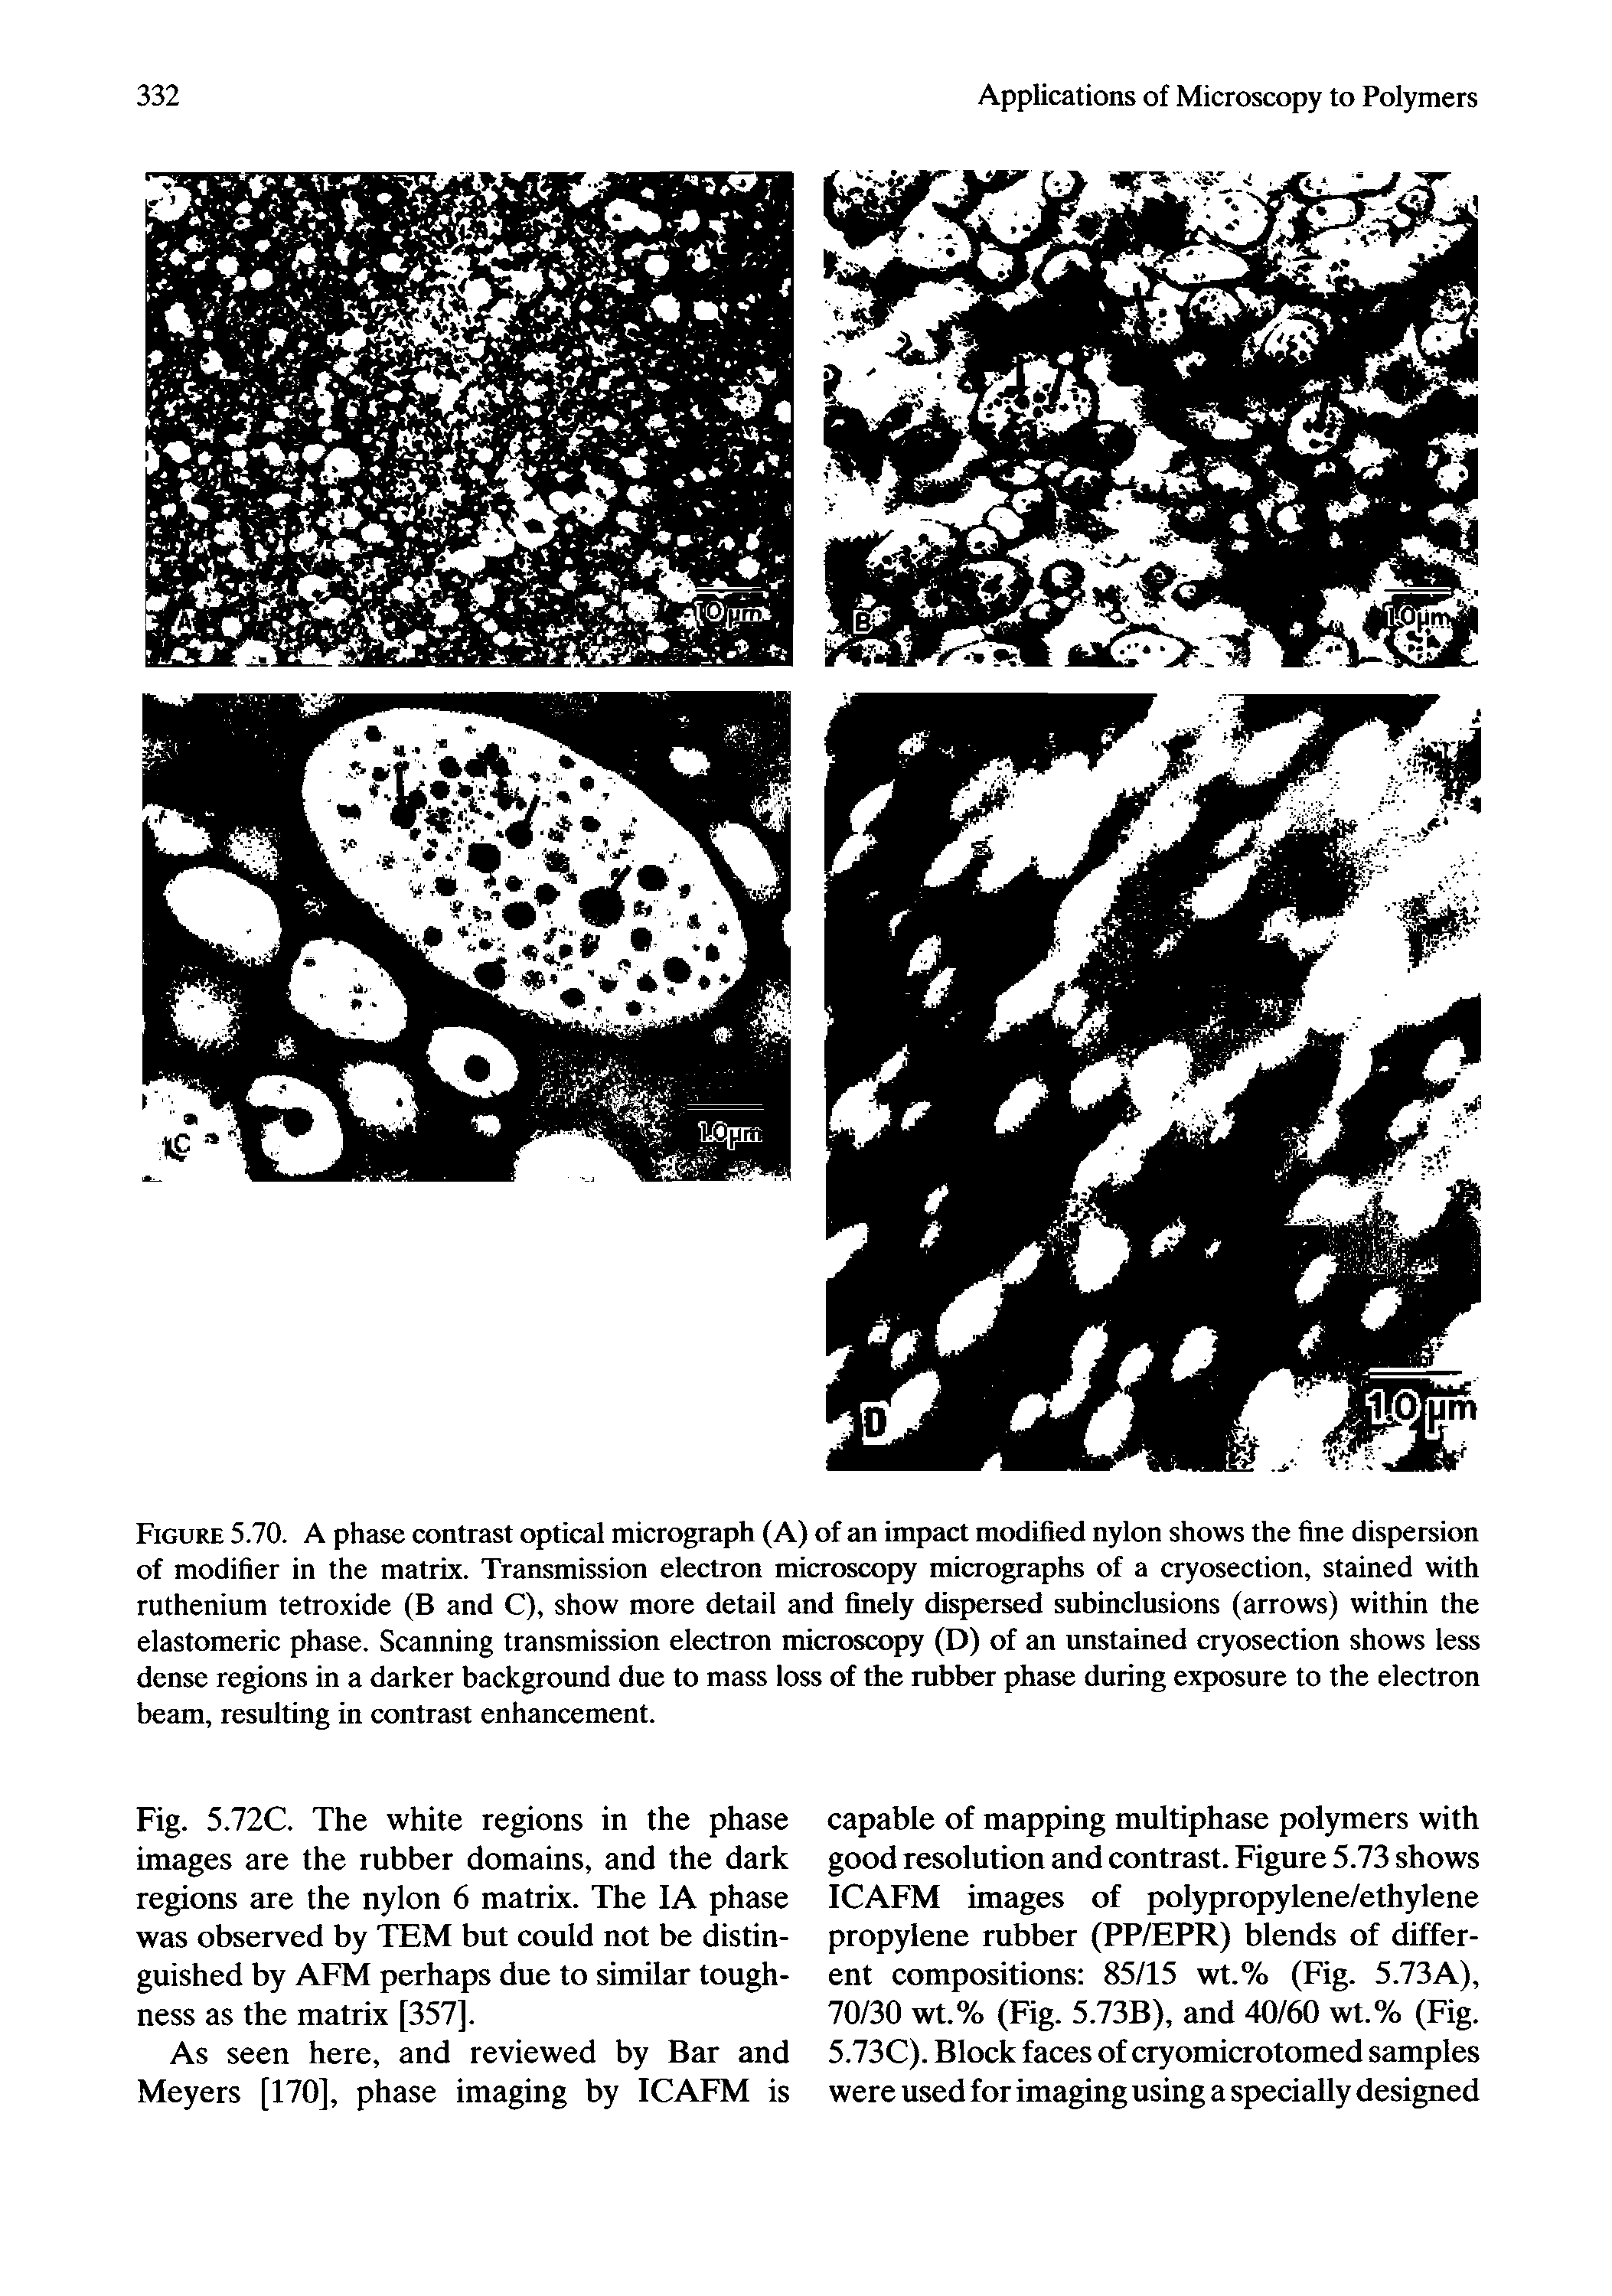 Figure 5.70. A phase contrast optical micrograph (A) of an impact modified nylon shows the fine dispersion of modifier in the matrix. Transmission electron microscopy micrographs of a cryosection, stained with ruthenium tetroxide (B and C), show more detail and finely dispersed subinclusions (arrows) within the elastomeric phase. Scanning transmission electron microscopy (D) of an unstained cryosection shows less dense regions in a darker background due to mass loss of the rubber phase during exposure to the electron beam, resulting in contrast enhancement.